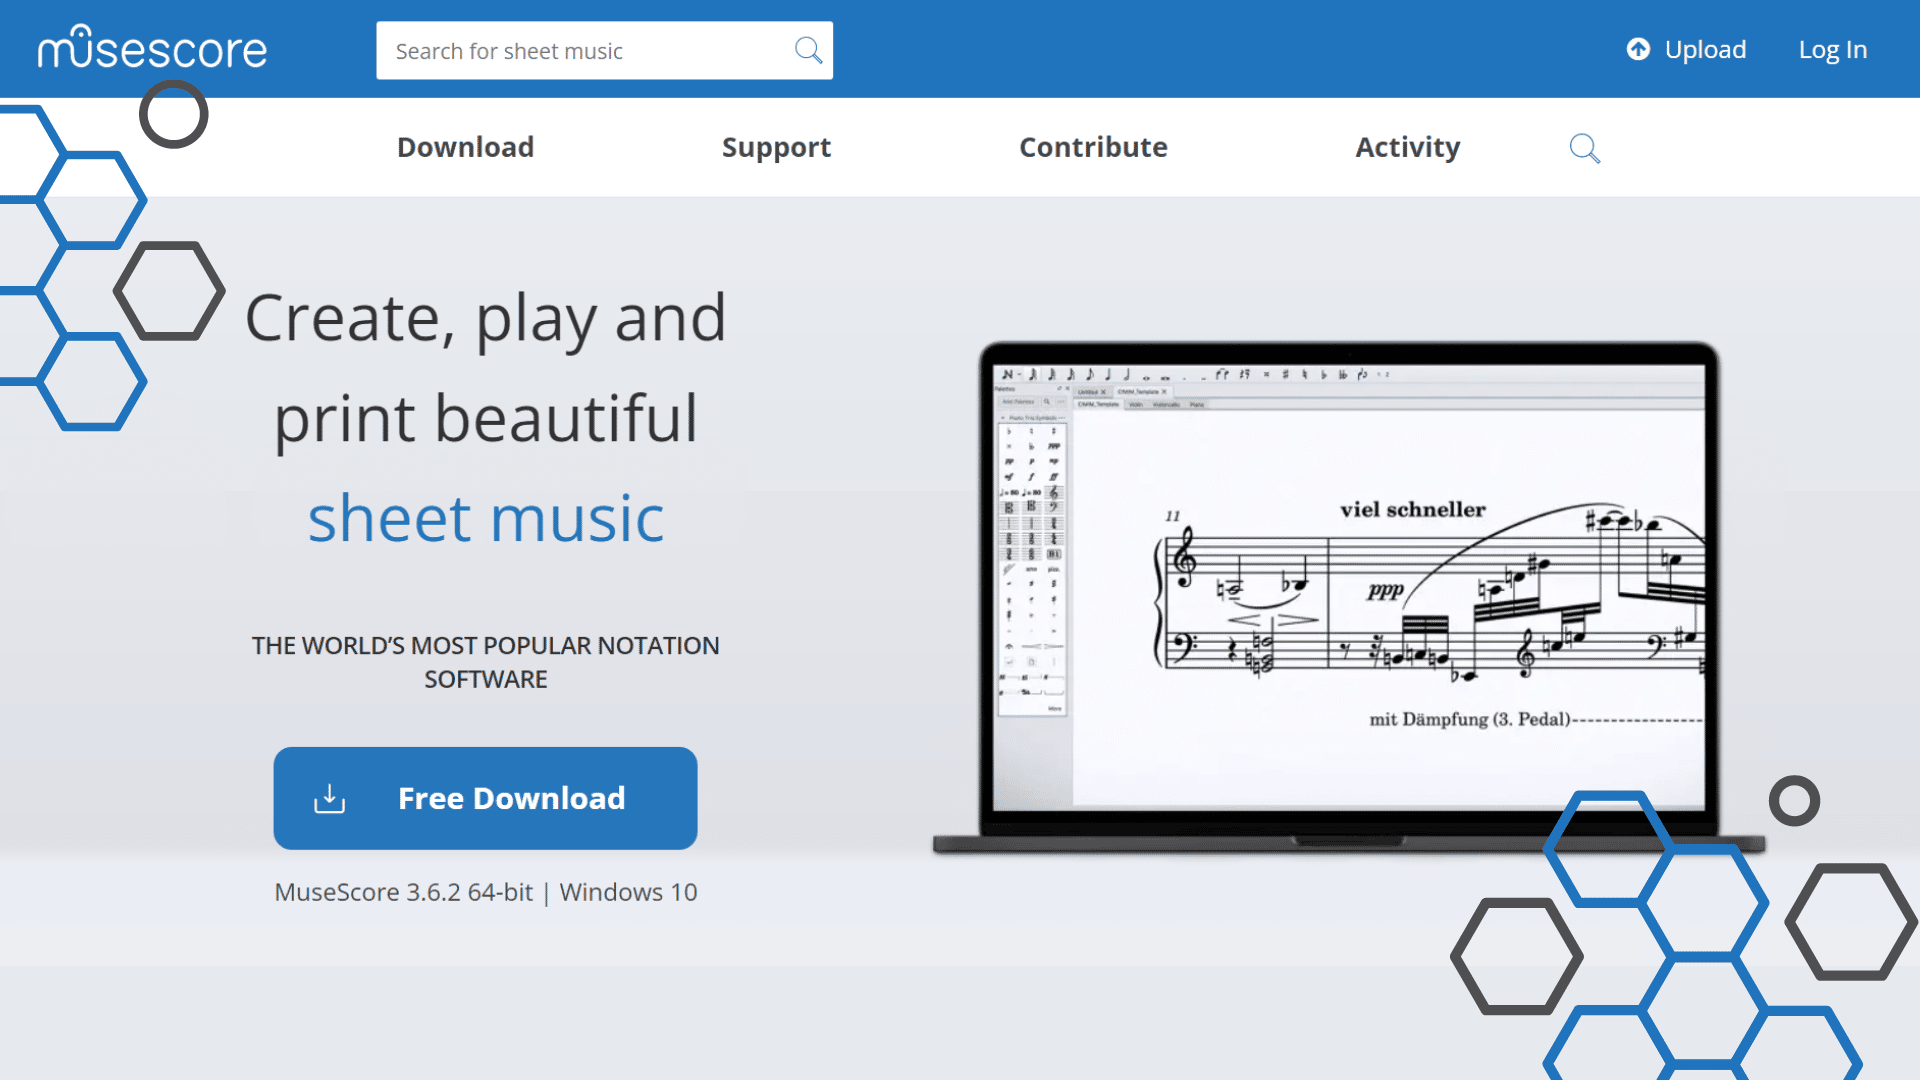 MuseScore Features